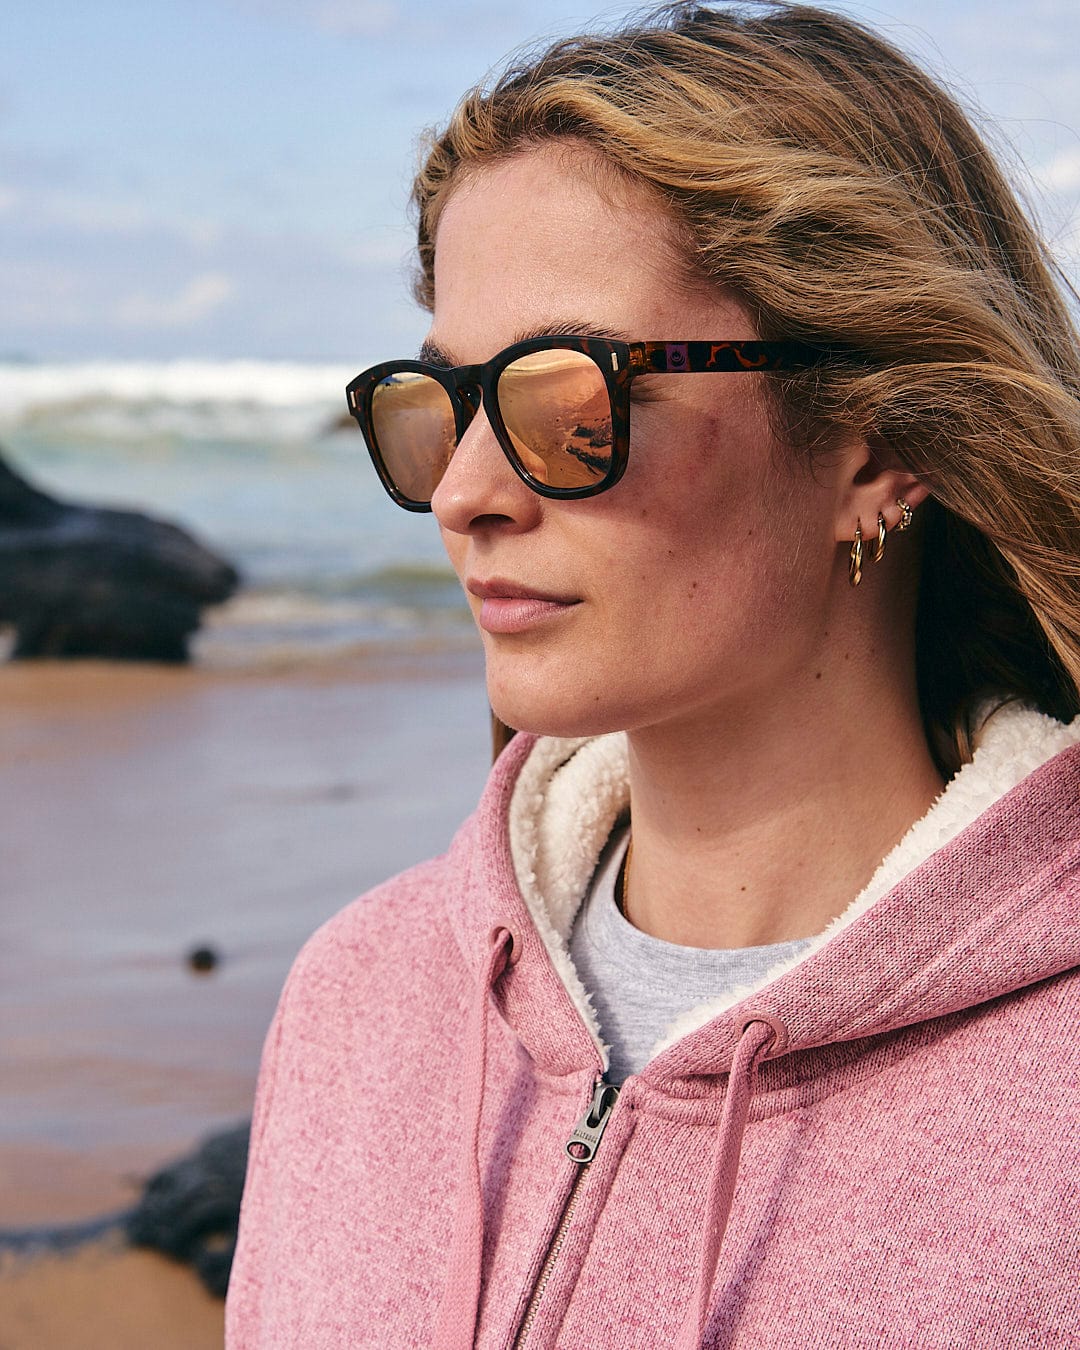 A woman wearing sunglasses and a pink hoodie, finding comfort in her Saltrock Galak - Womens Fur Lined Hoody - Pink, enjoying an adventure on the beach.